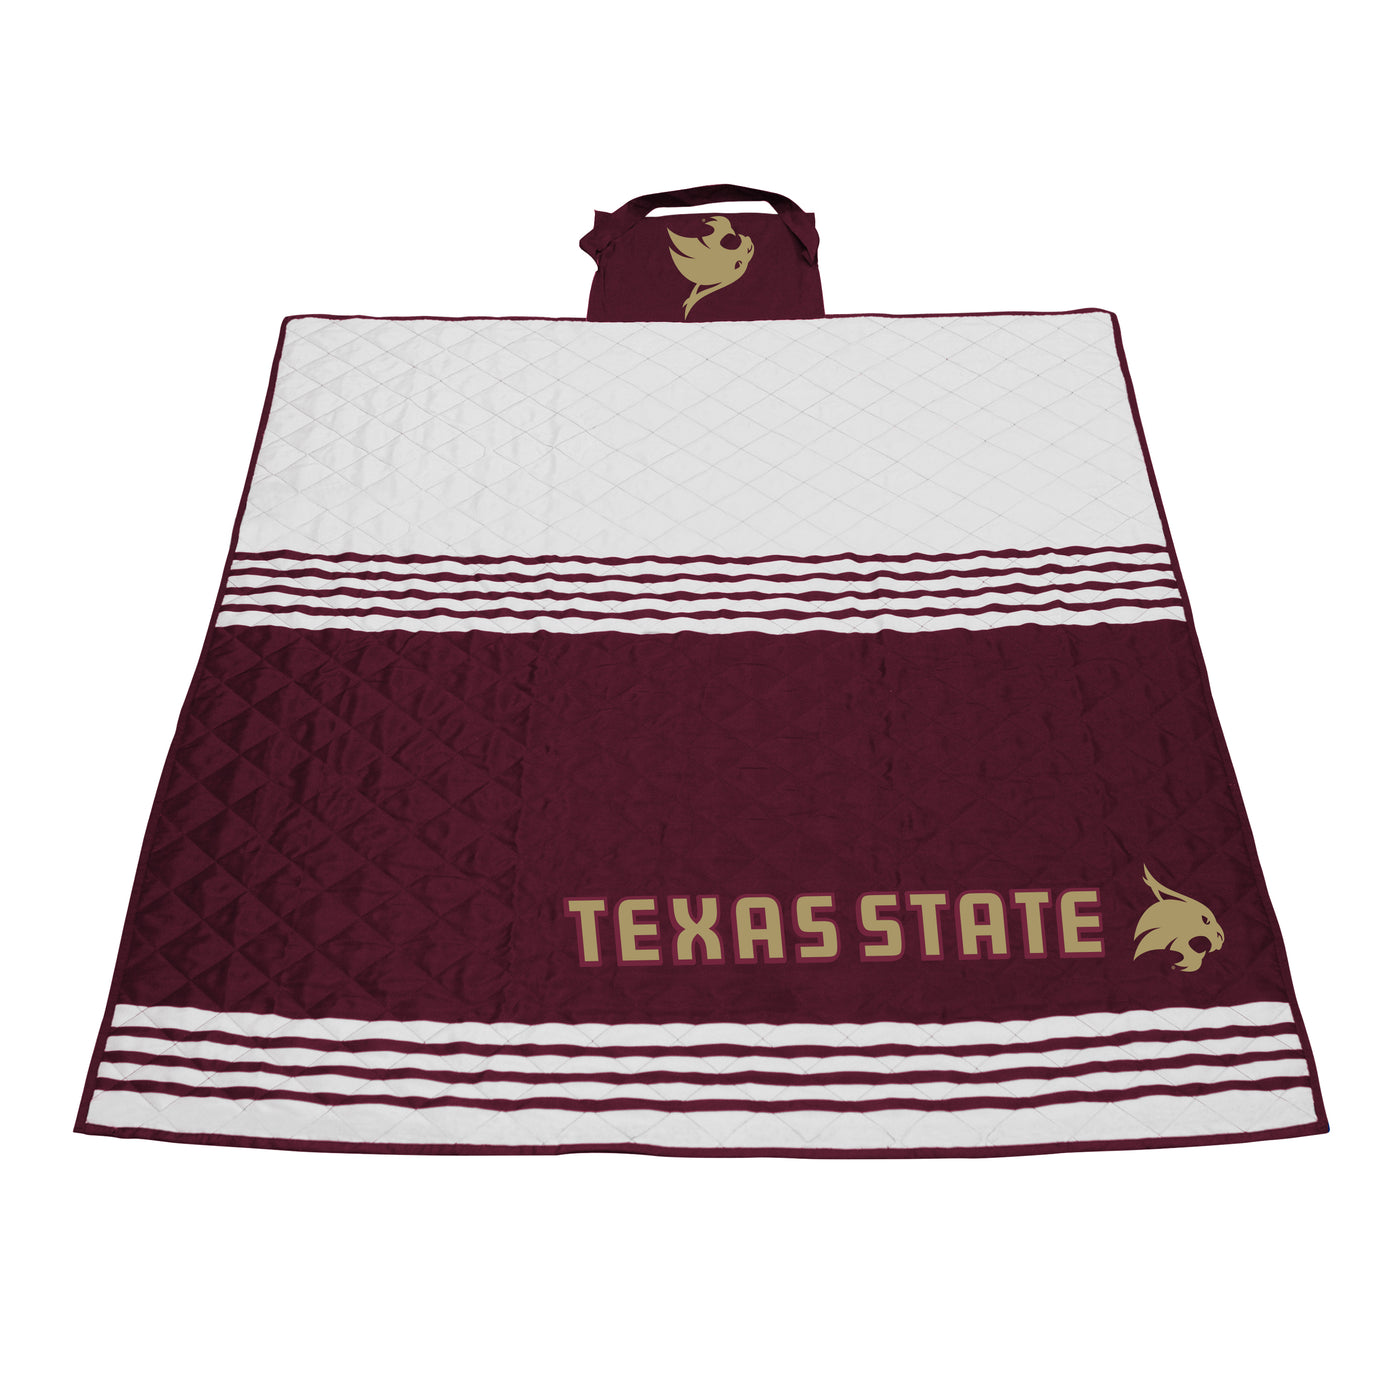 Texas State Outdoor Blanket